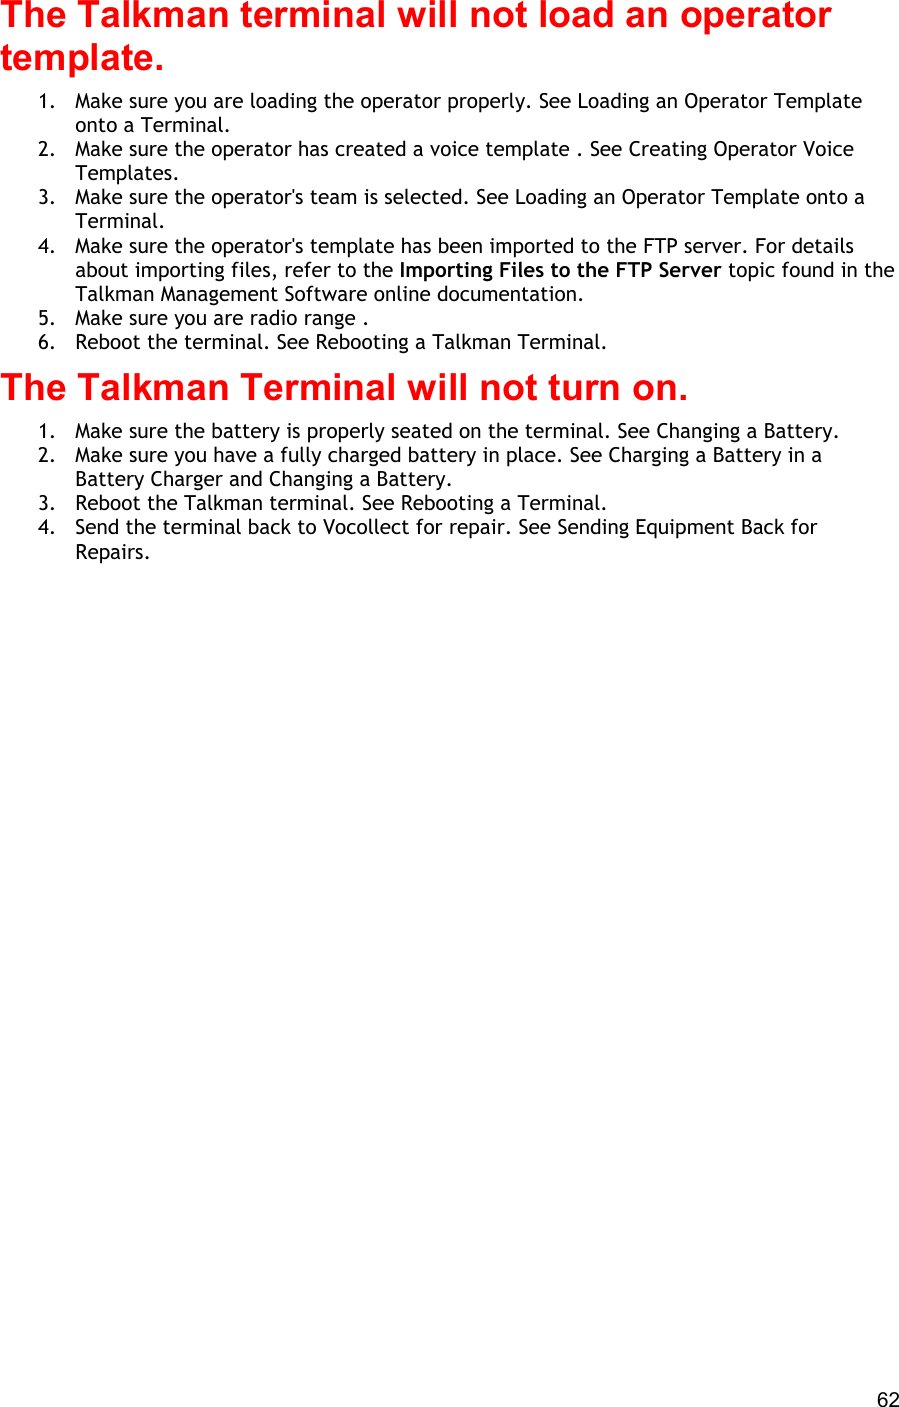  62 The Talkman terminal will not load an operator template. 1.  Make sure you are loading the operator properly. See Loading an Operator Template onto a Terminal. 2.  Make sure the operator has created a voice template . See Creating Operator Voice Templates. 3.  Make sure the operator&apos;s team is selected. See Loading an Operator Template onto a Terminal. 4.  Make sure the operator&apos;s template has been imported to the FTP server. For details about importing files, refer to the Importing Files to the FTP Server topic found in the Talkman Management Software online documentation. 5.  Make sure you are radio range .  6.  Reboot the terminal. See Rebooting a Talkman Terminal. The Talkman Terminal will not turn on. 1.  Make sure the battery is properly seated on the terminal. See Changing a Battery. 2.  Make sure you have a fully charged battery in place. See Charging a Battery in a Battery Charger and Changing a Battery. 3.  Reboot the Talkman terminal. See Rebooting a Terminal. 4.  Send the terminal back to Vocollect for repair. See Sending Equipment Back for Repairs.   